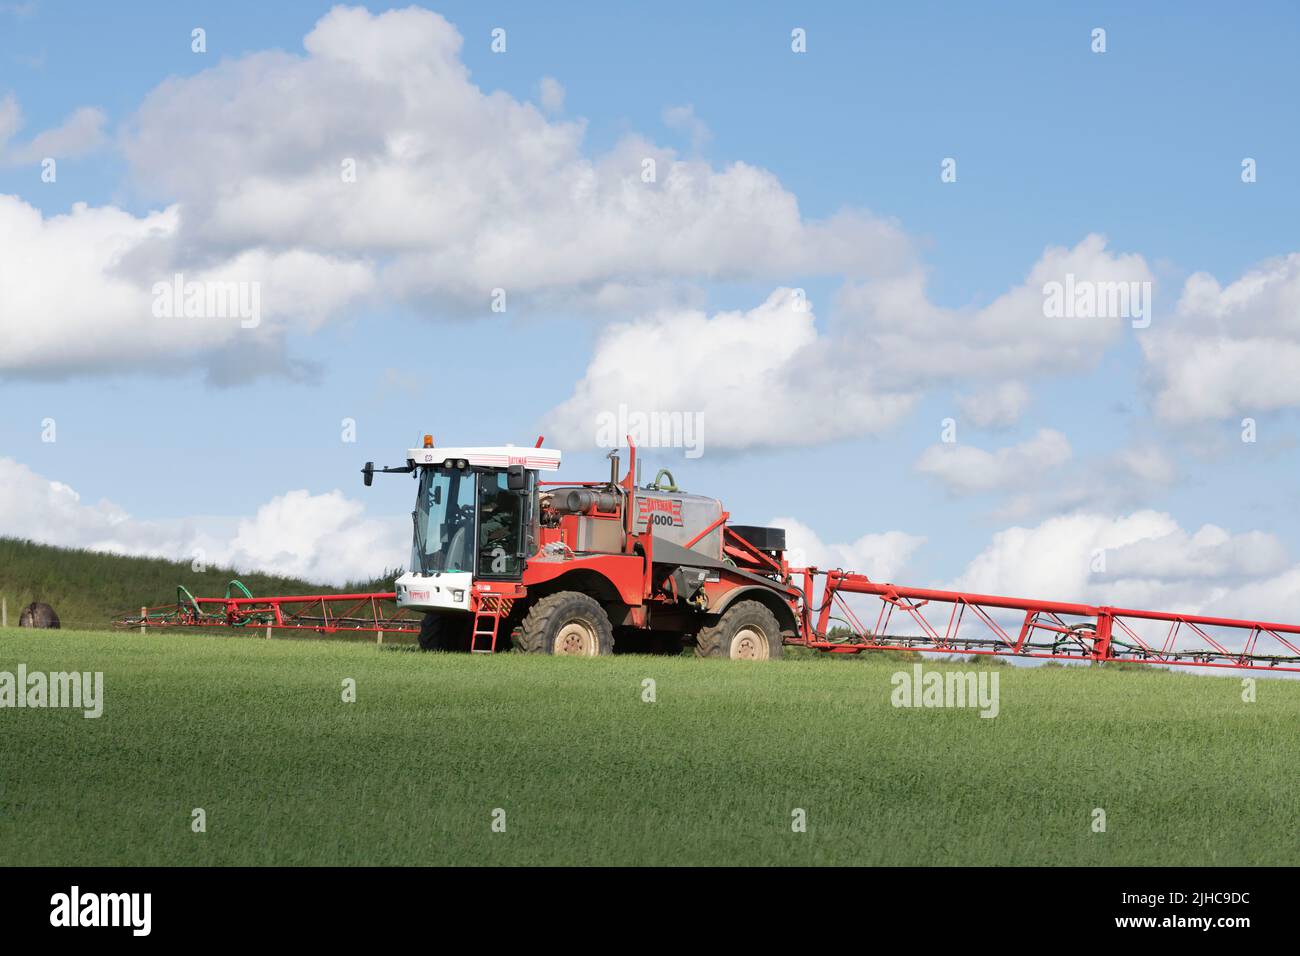 A Crop Sprayer Working in a Field of Spring Barley Beneath Cumulus Clouds on a Sunny Summer Morning Stock Photo